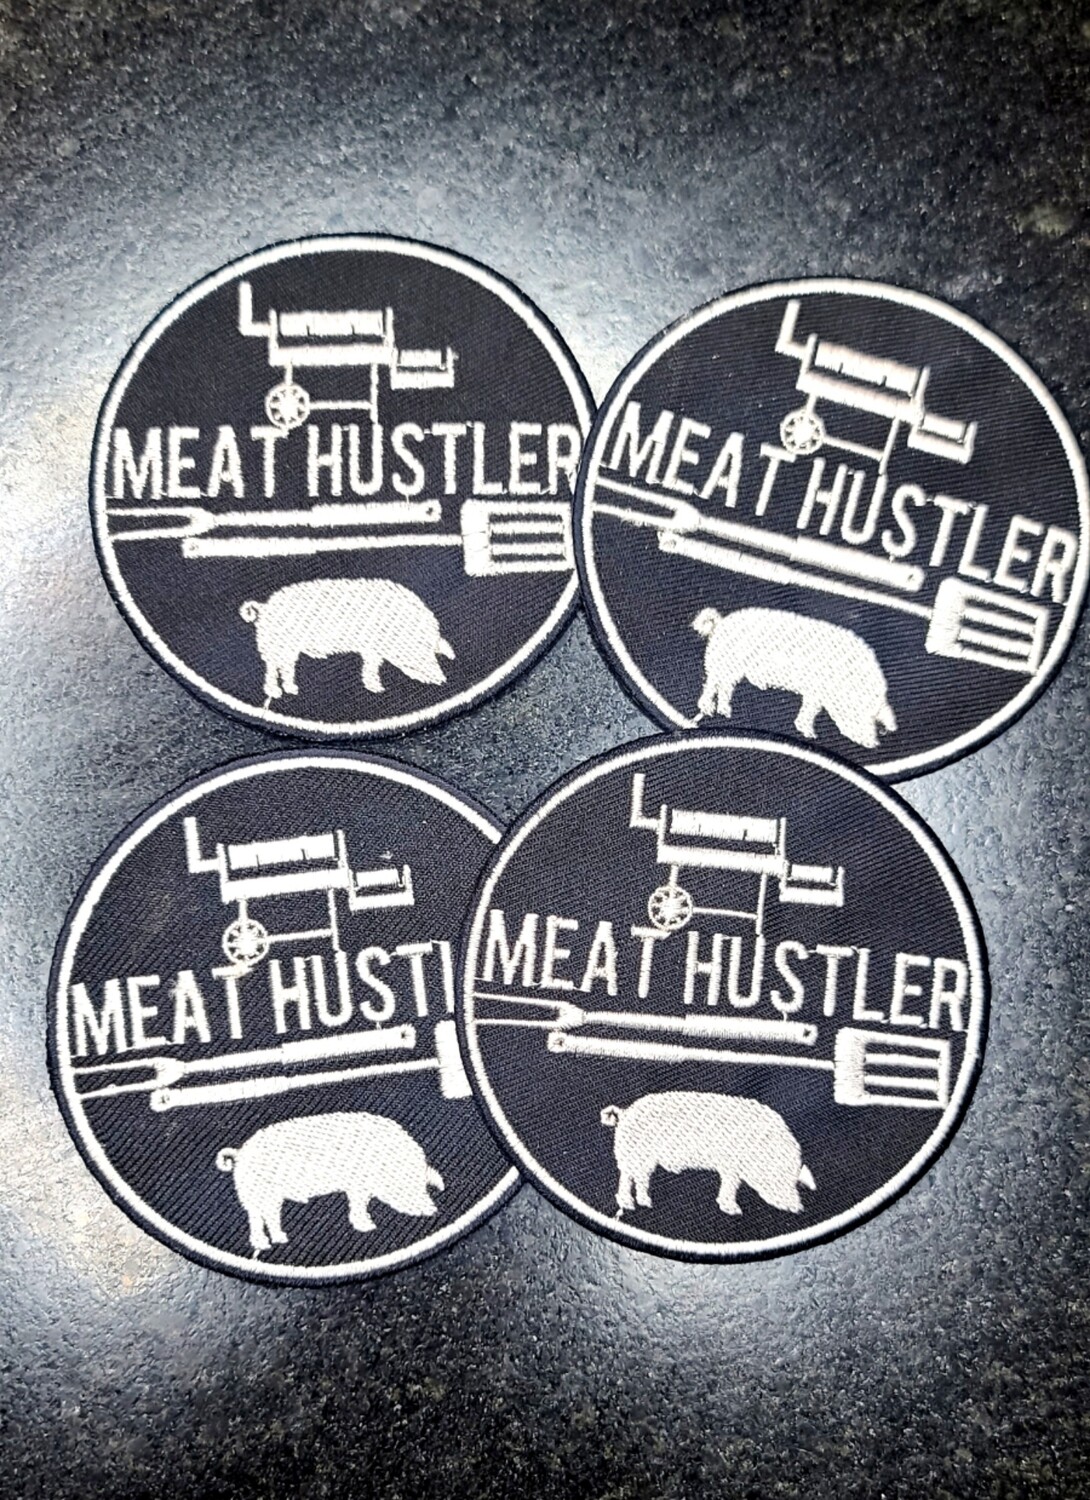 Meat Hustler Nation Iron on patch